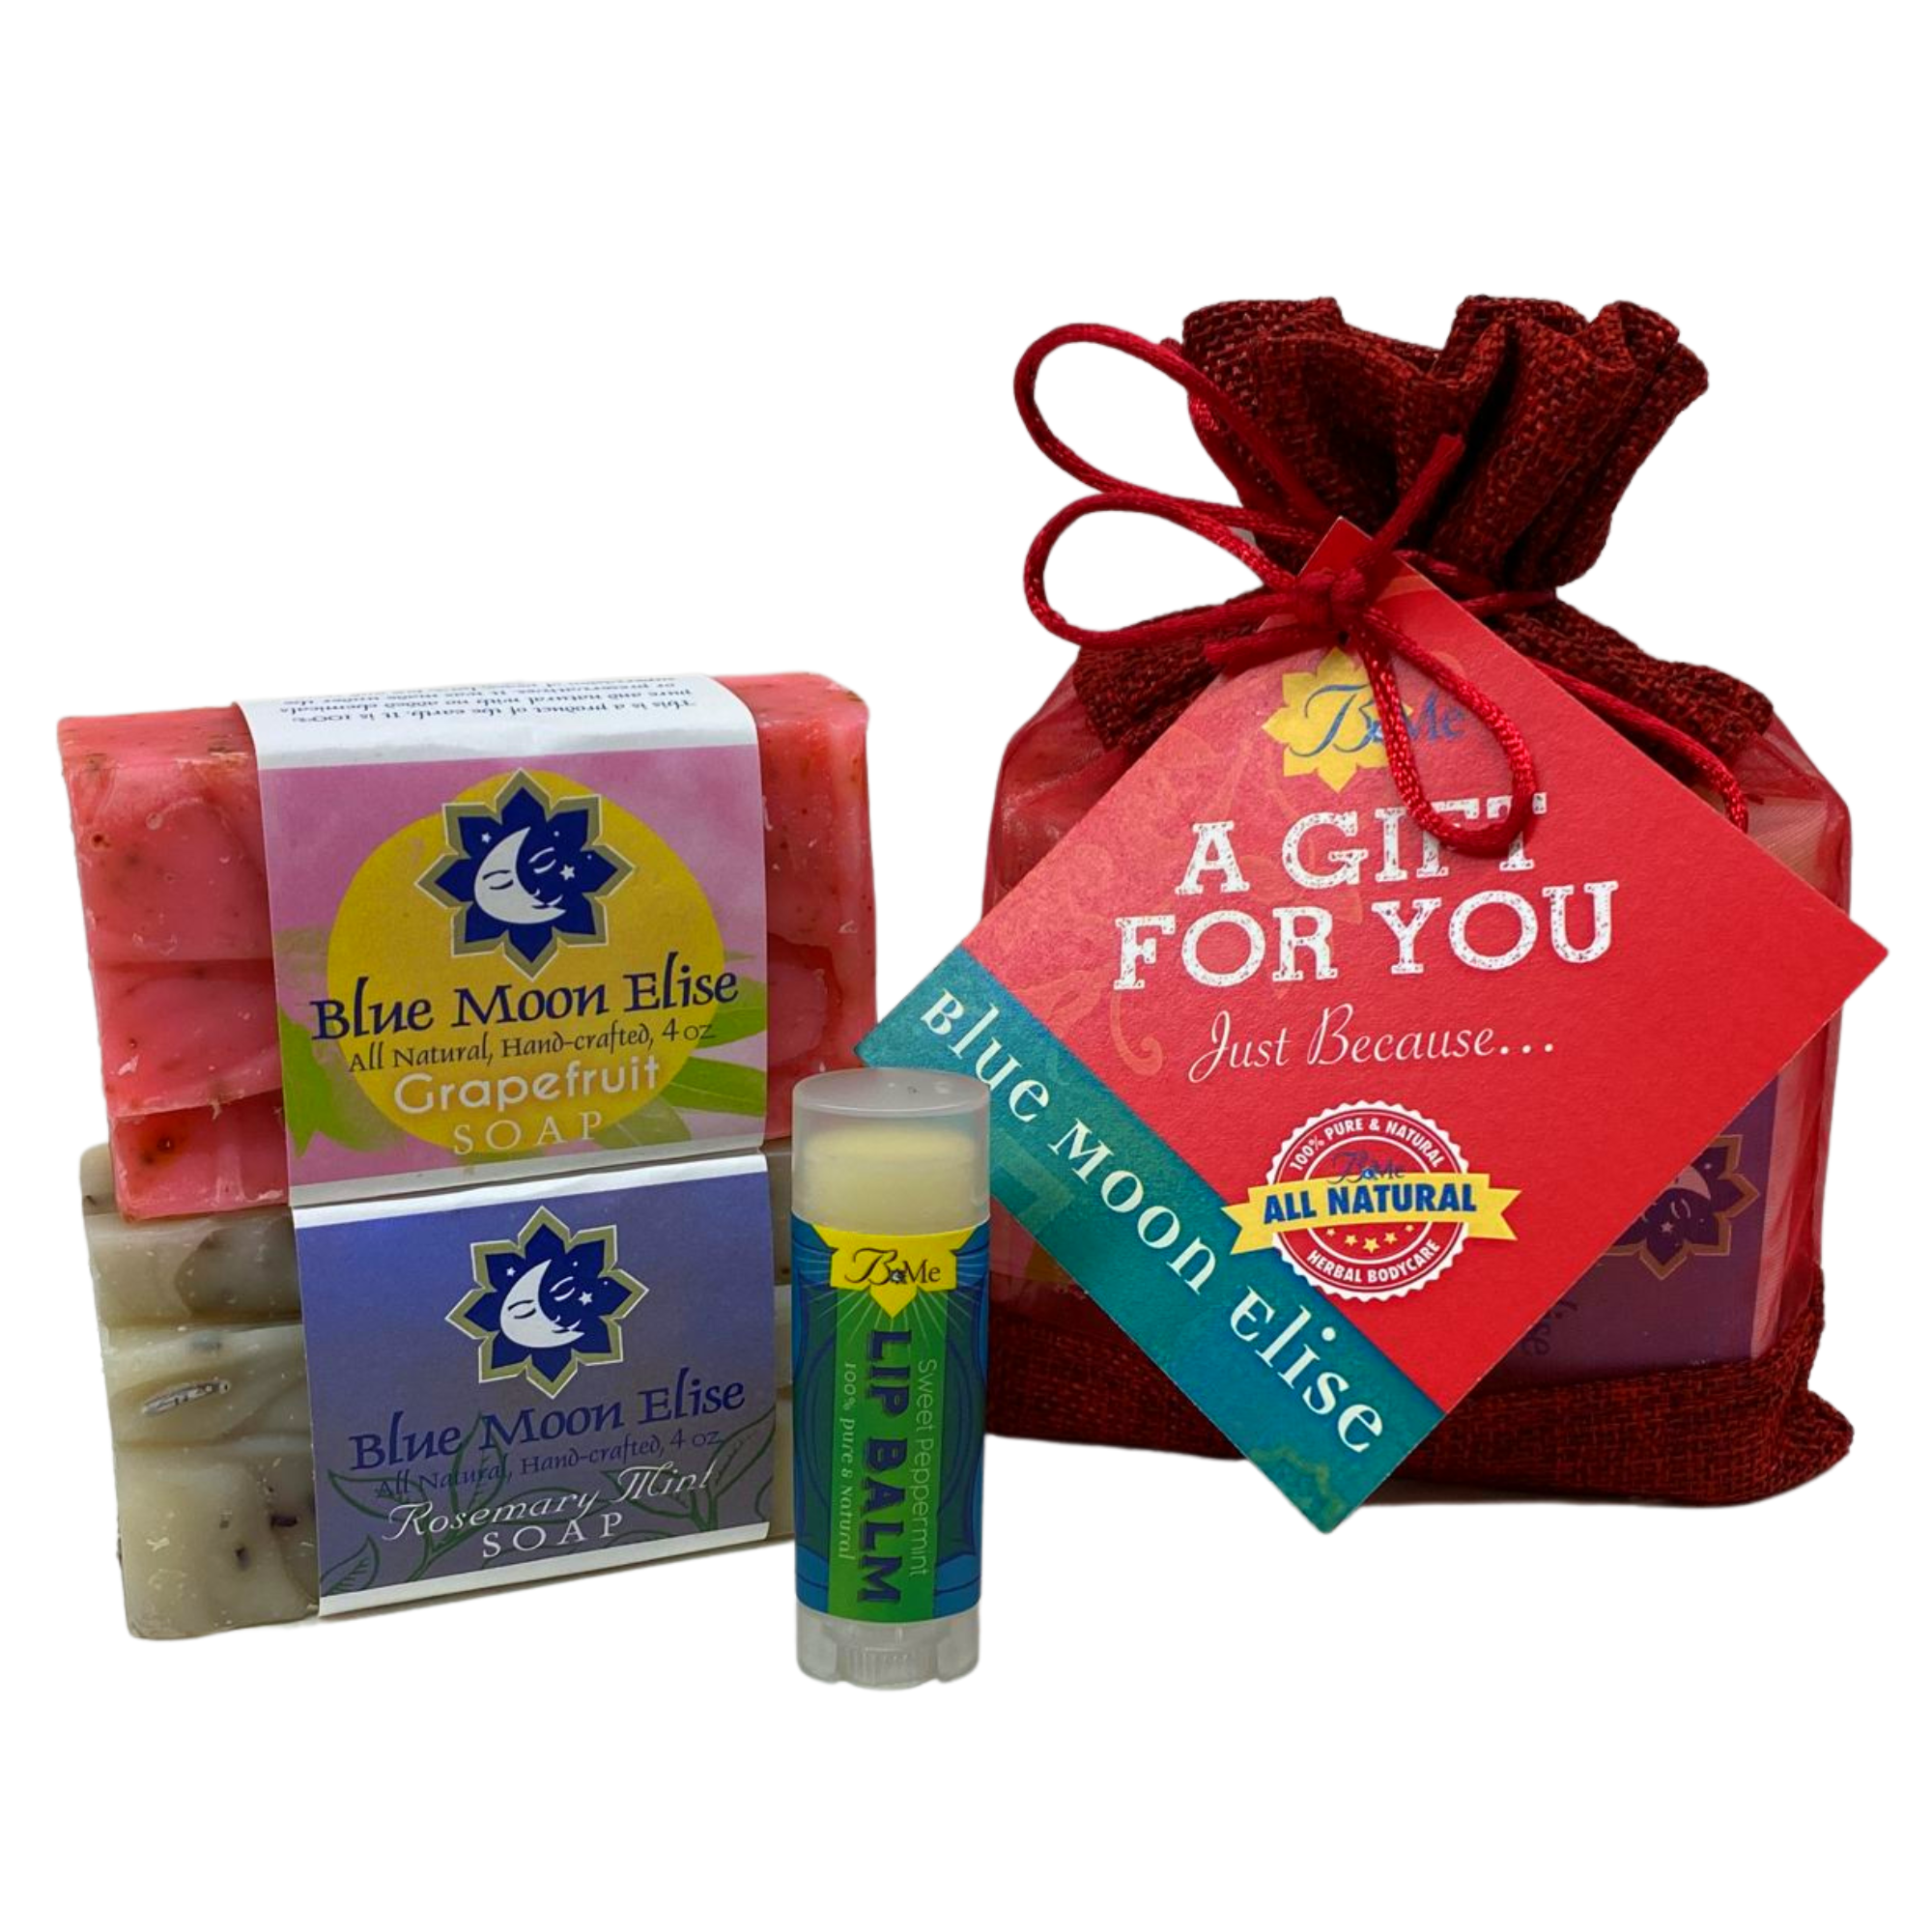 A Gift For You - Secret Santa/Small Token - BUY 4, GET 1 FREE